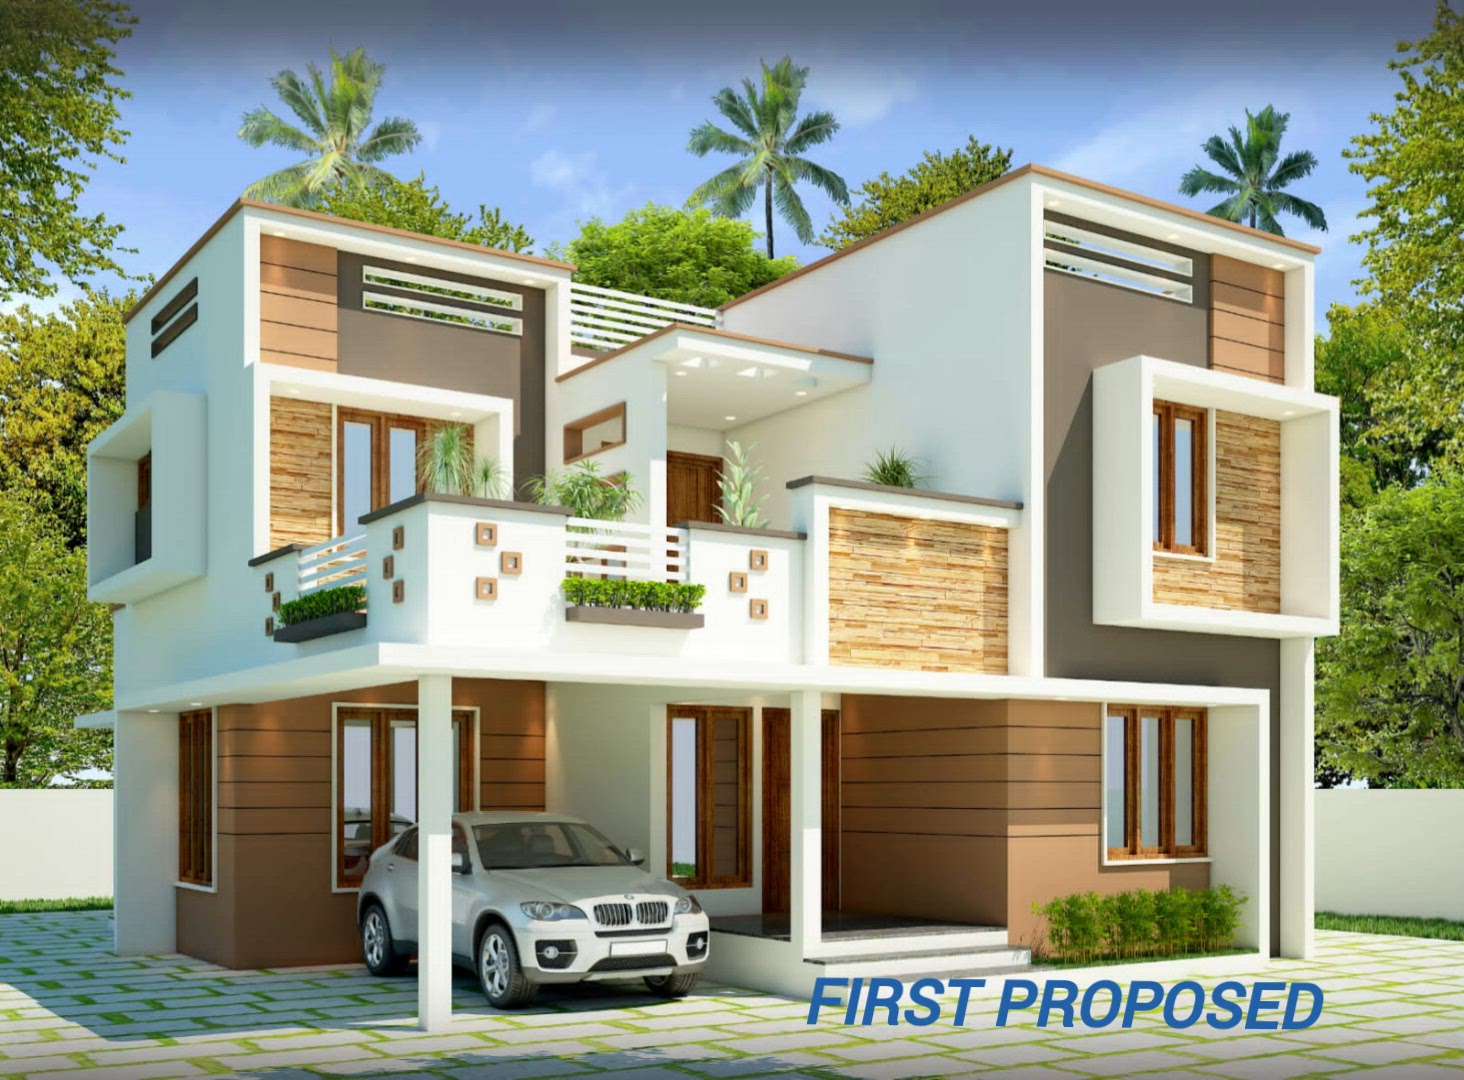 #KeralaStyleHouse  #completed_house_construction  #3DPlans